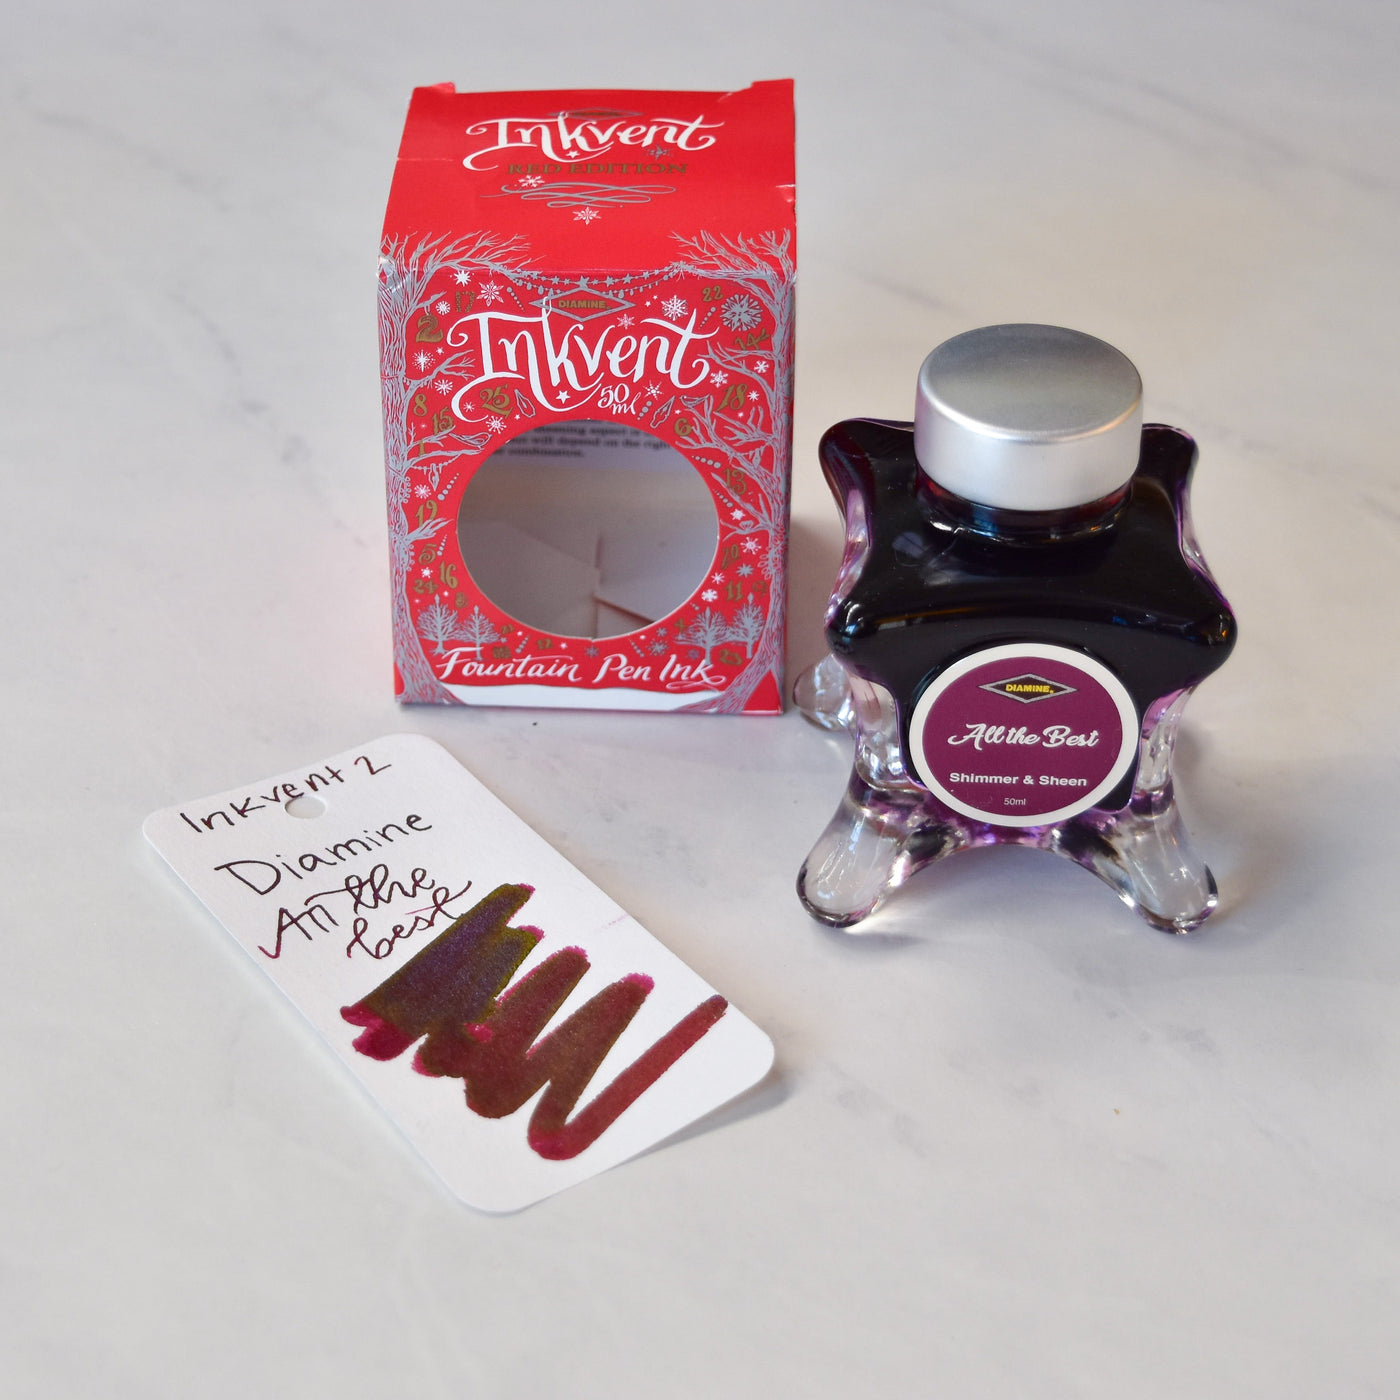 Diamine Inkvent Year 2 All the Best Ink Bottle